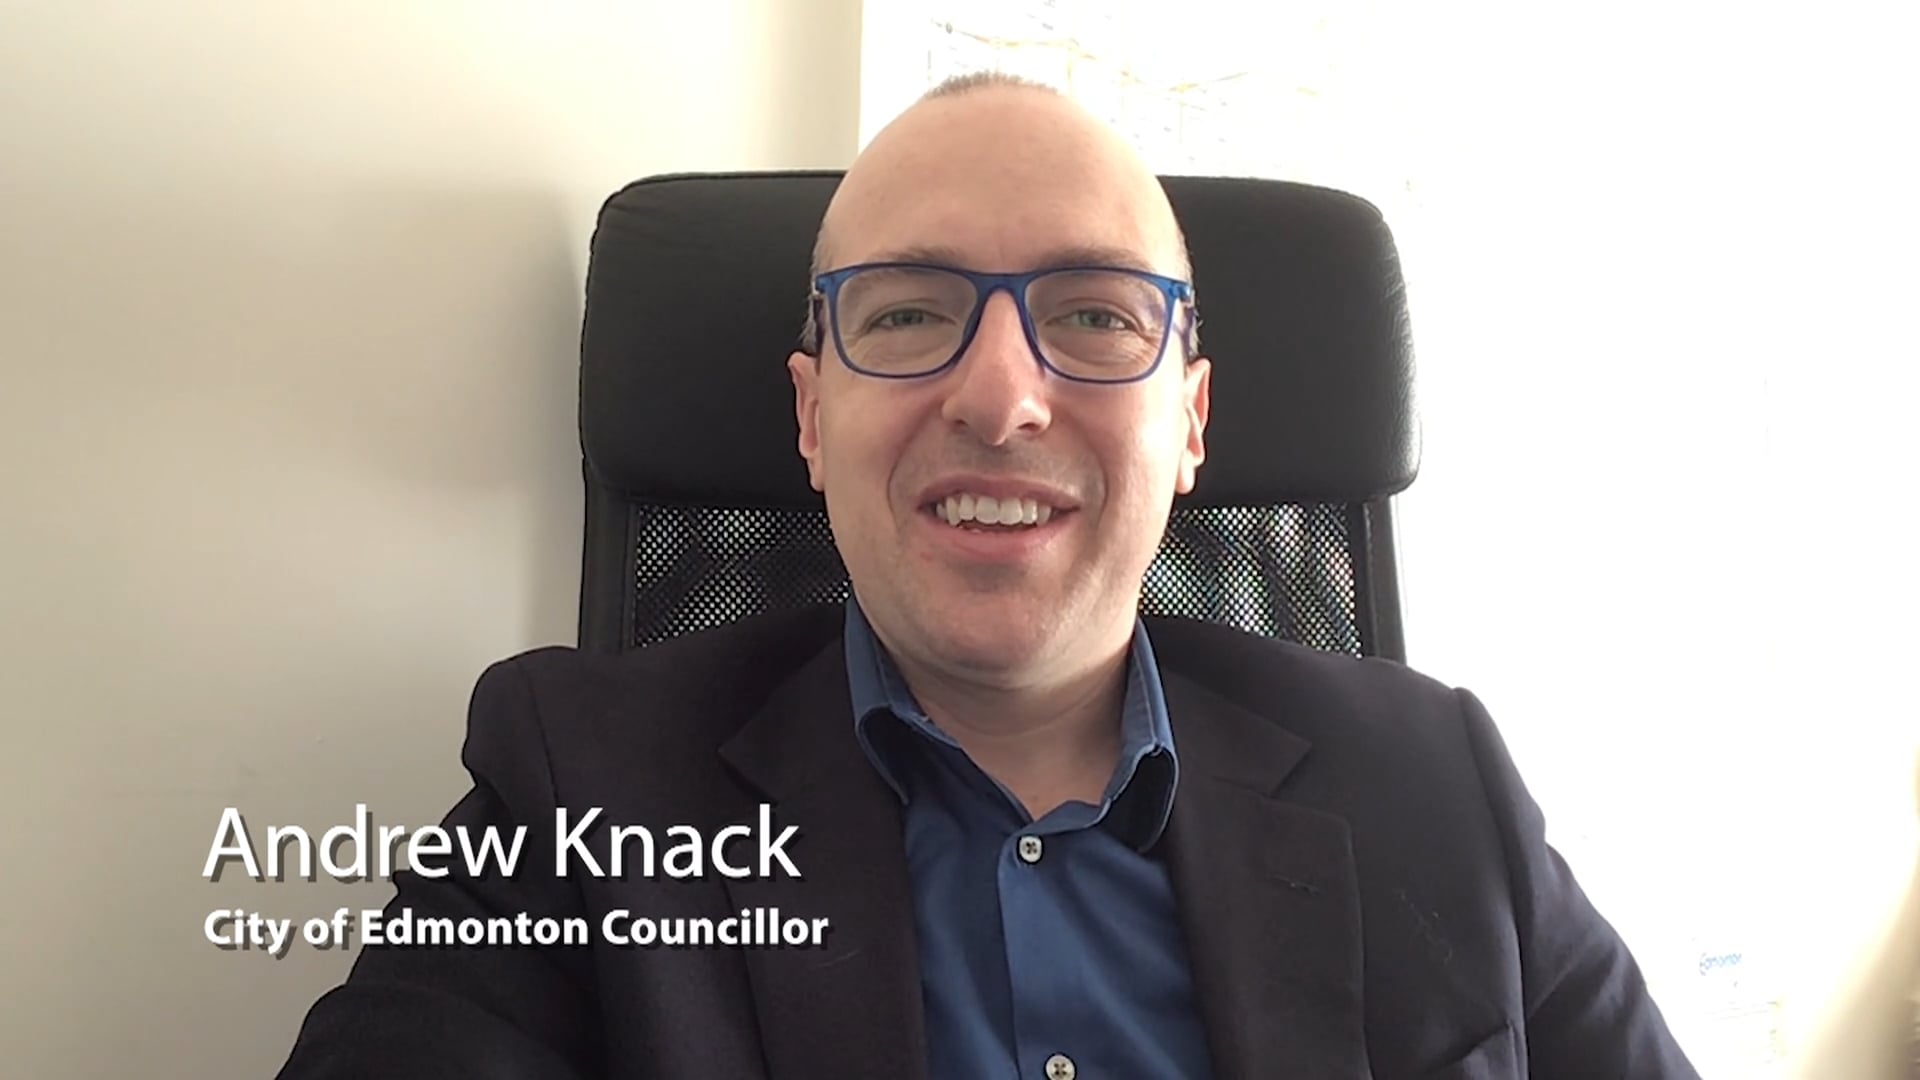 Councillor Andrew Knack